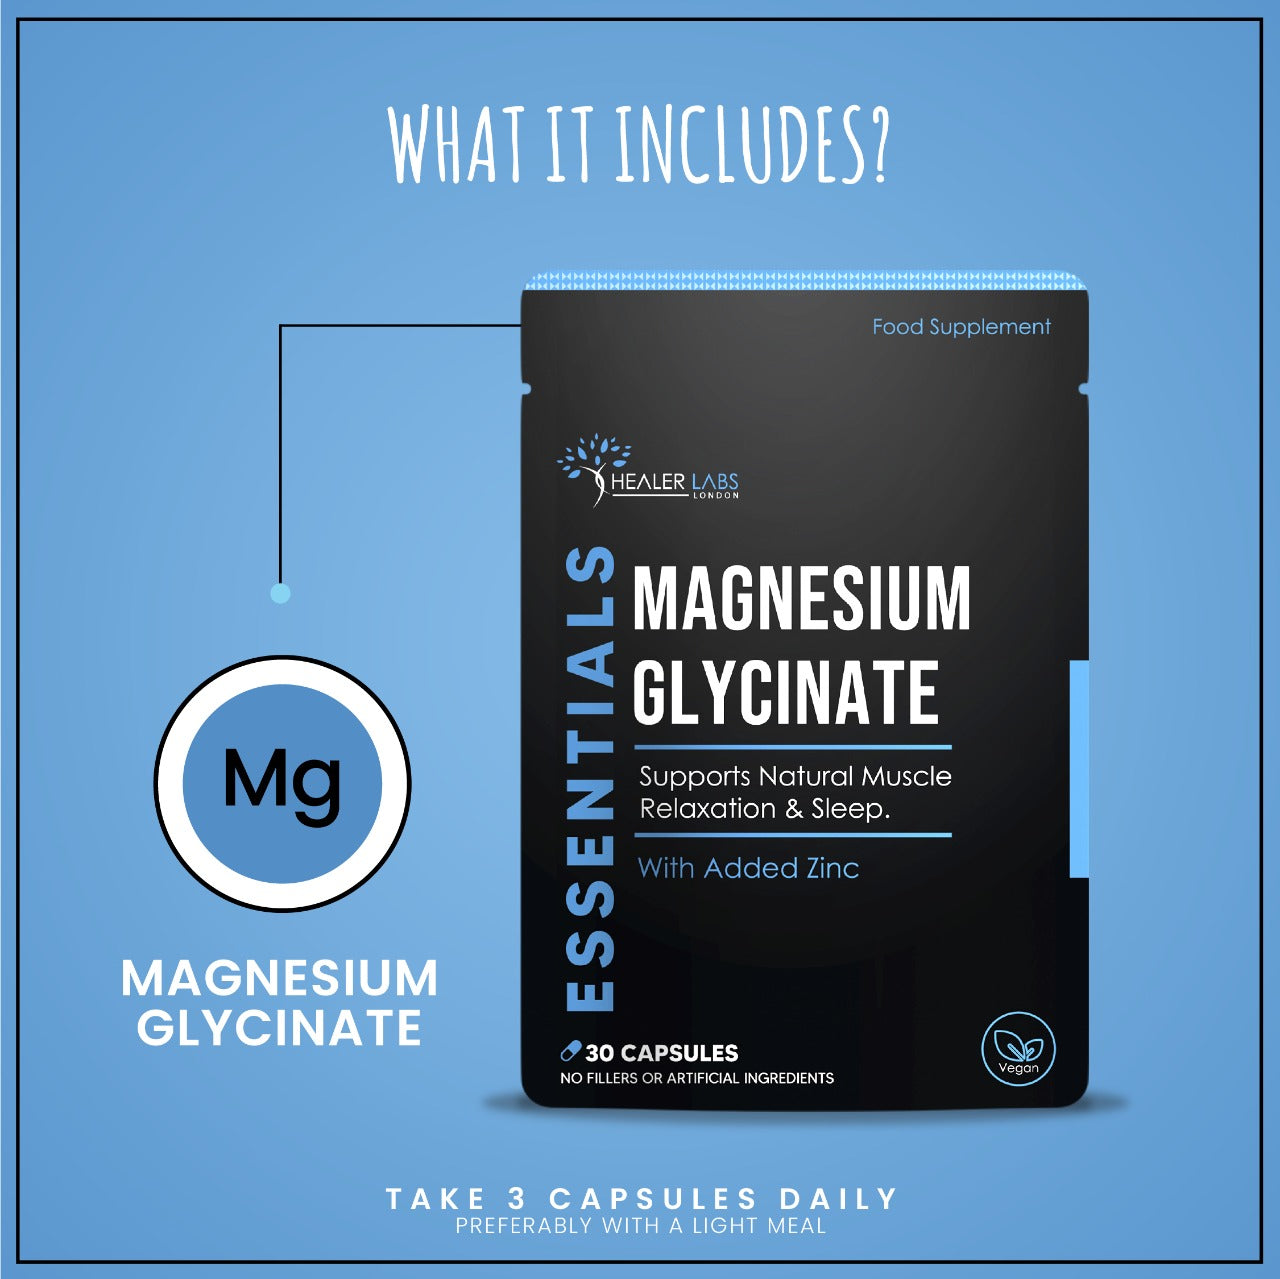  Healer Labs - Magnesium Glycinate - The Beauty Corp.